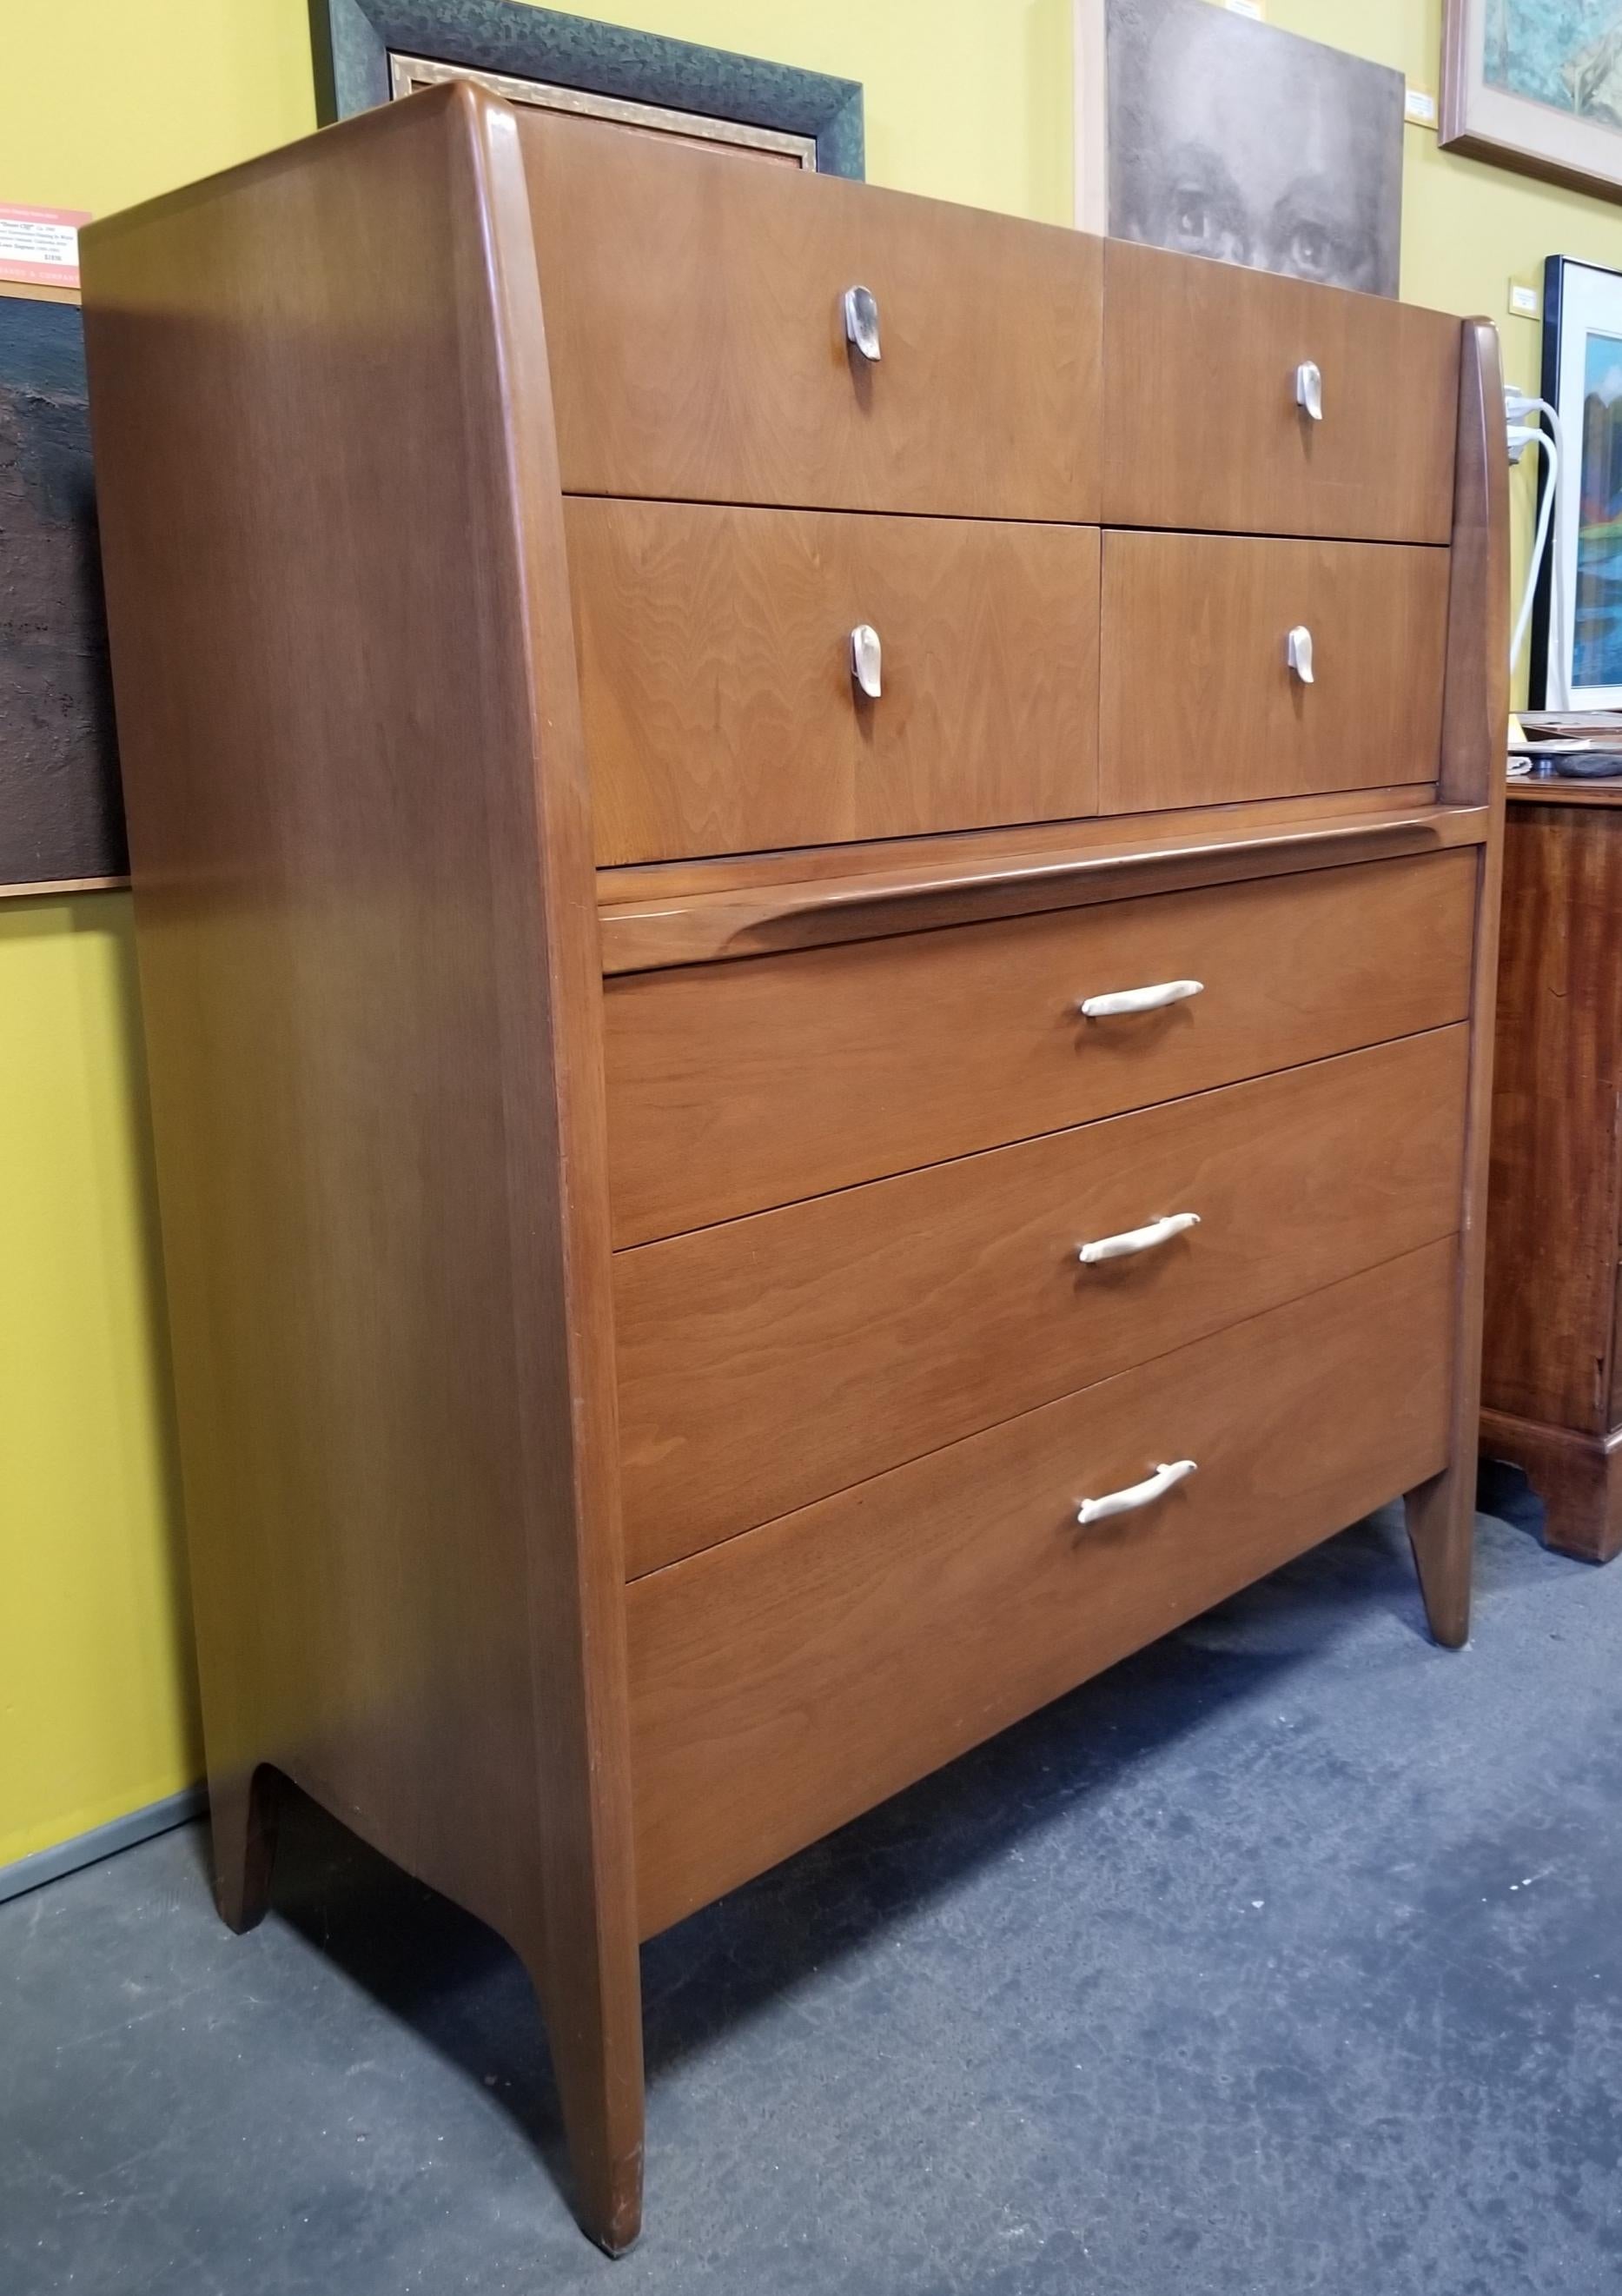 Quality craftsmanship and materials in this Mid-Century Modern highboy dresser designed by John Van Koert for Drexel Furniture. All wood construction solid oak secondary woods and dovetail detail. Drop-down drawer reveals flip up mirror. Very good